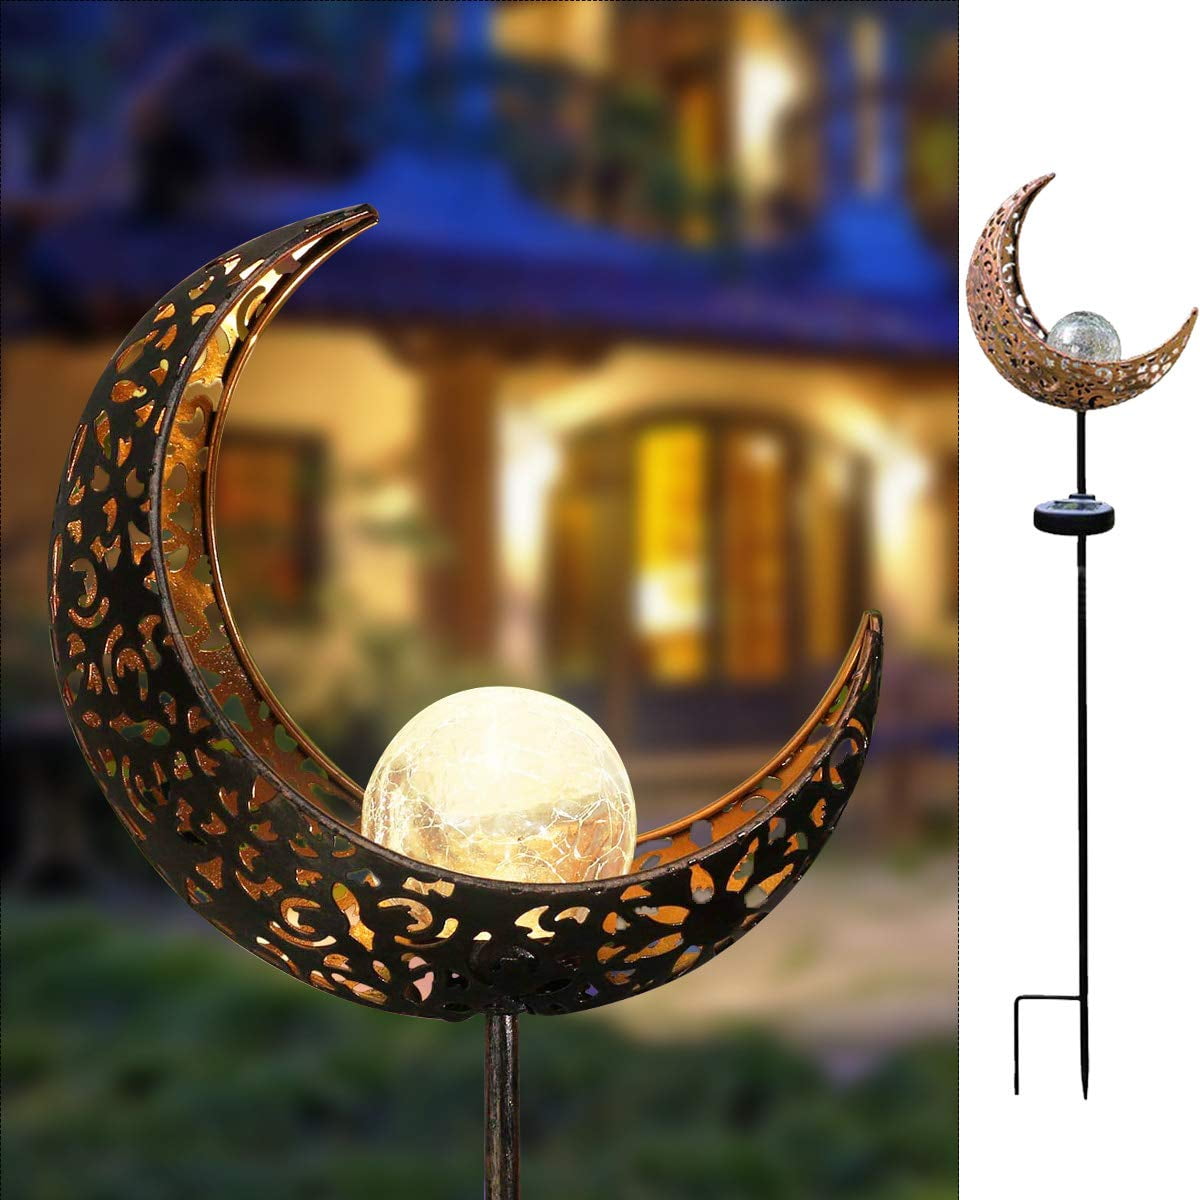 2 Packs Garden Solar Stake Lights,APONUO Pathway Outdoor Moon Crackle Glass Globe Stake Metal Lights,Waterproof Warm White LED for Lawn,Patio or Backyard 